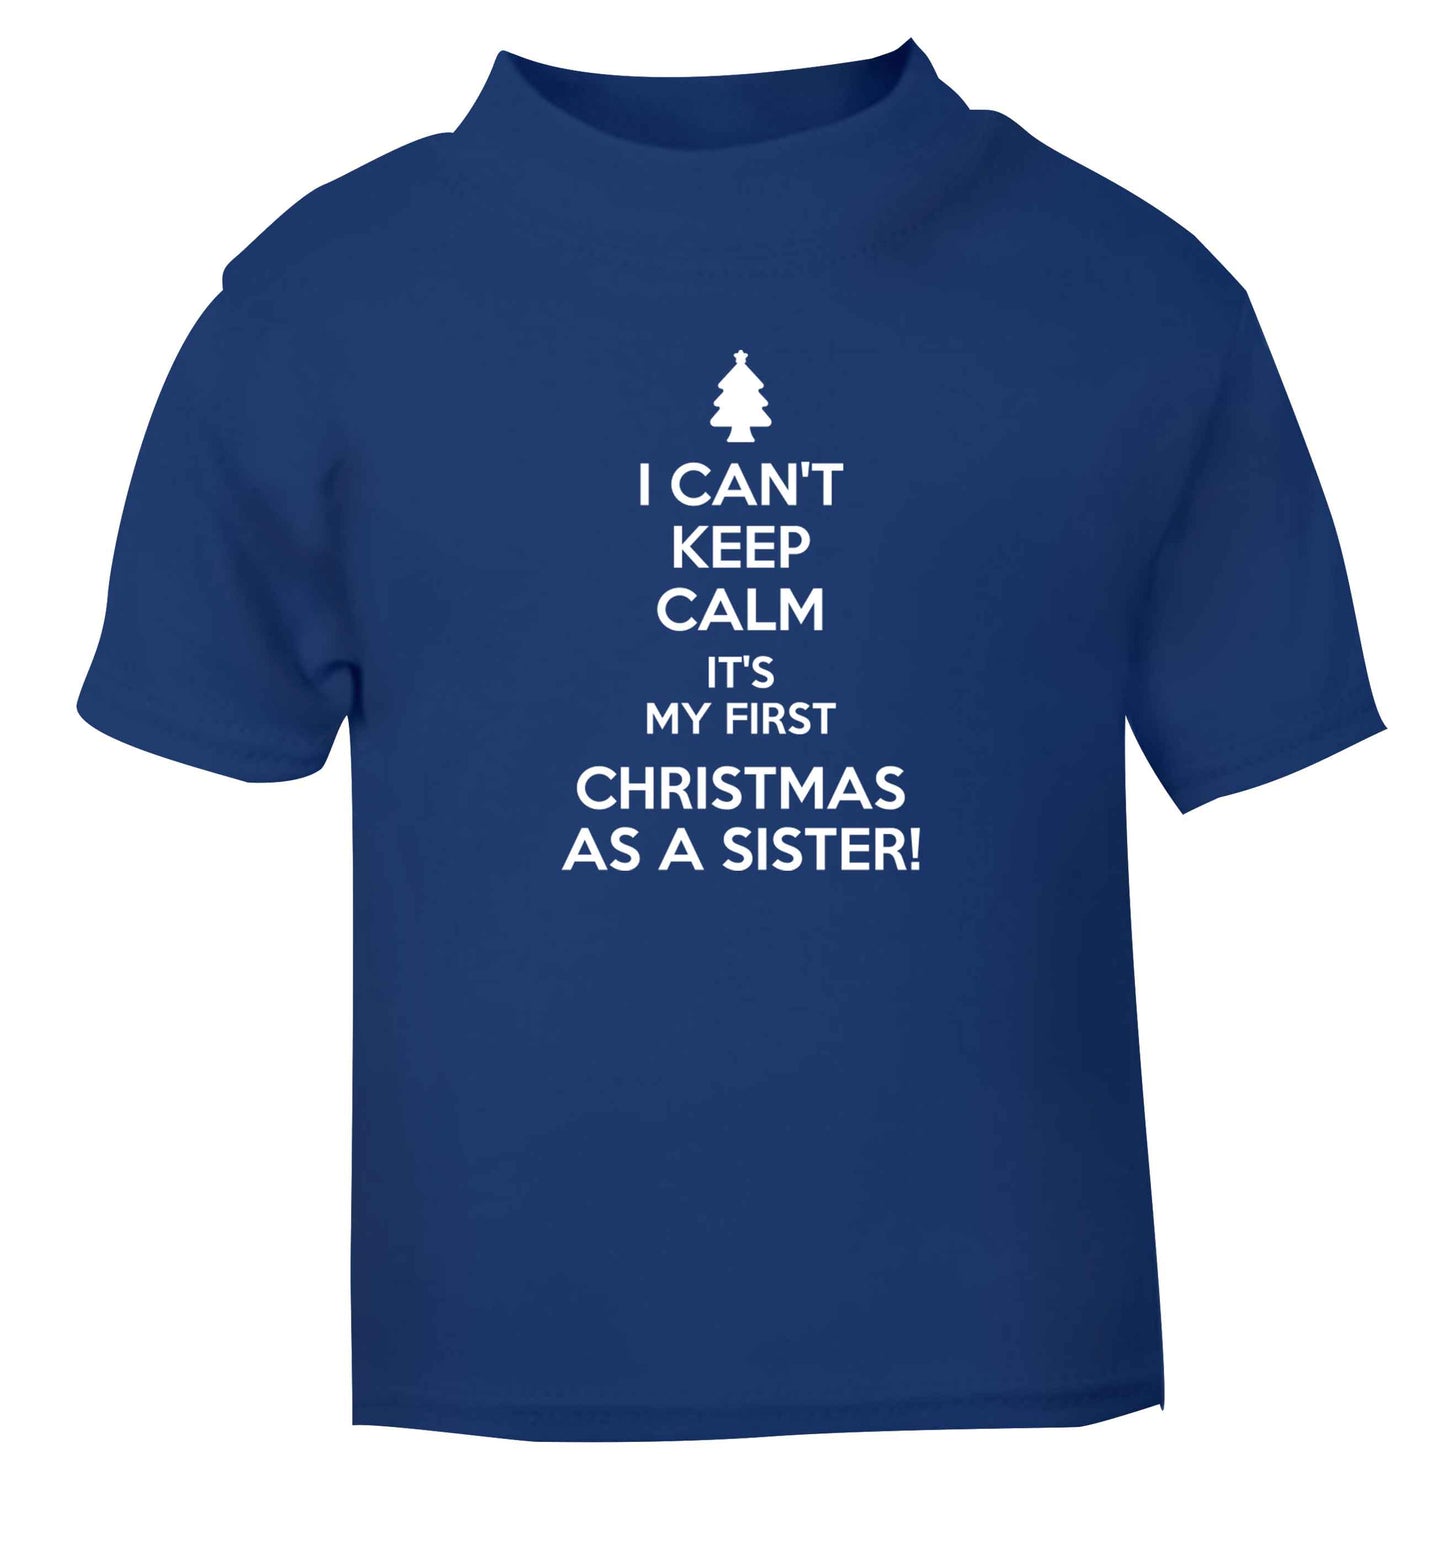 I can't keep calm it's my first Christmas as a sister! blue Baby Toddler Tshirt 2 Years